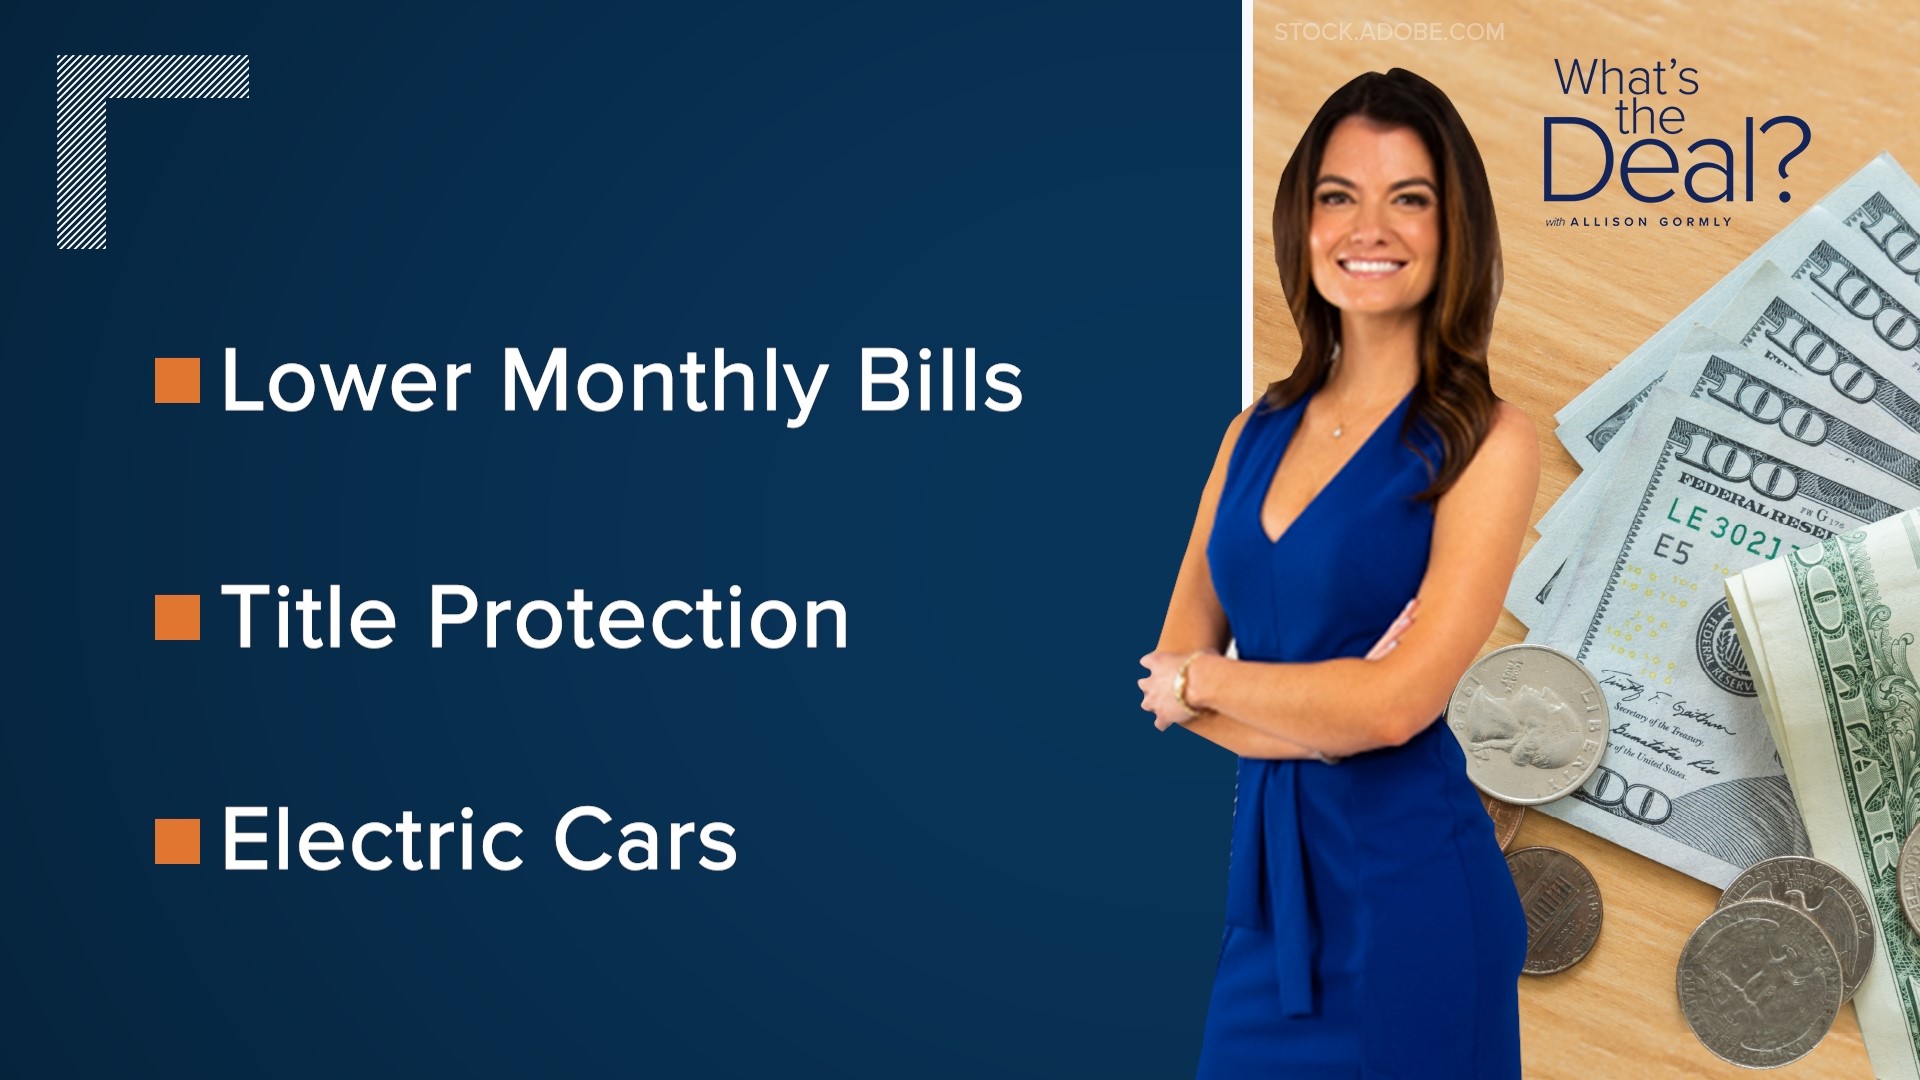 We look at what's the deal with lowering monthly bills, home title protection and electric cars